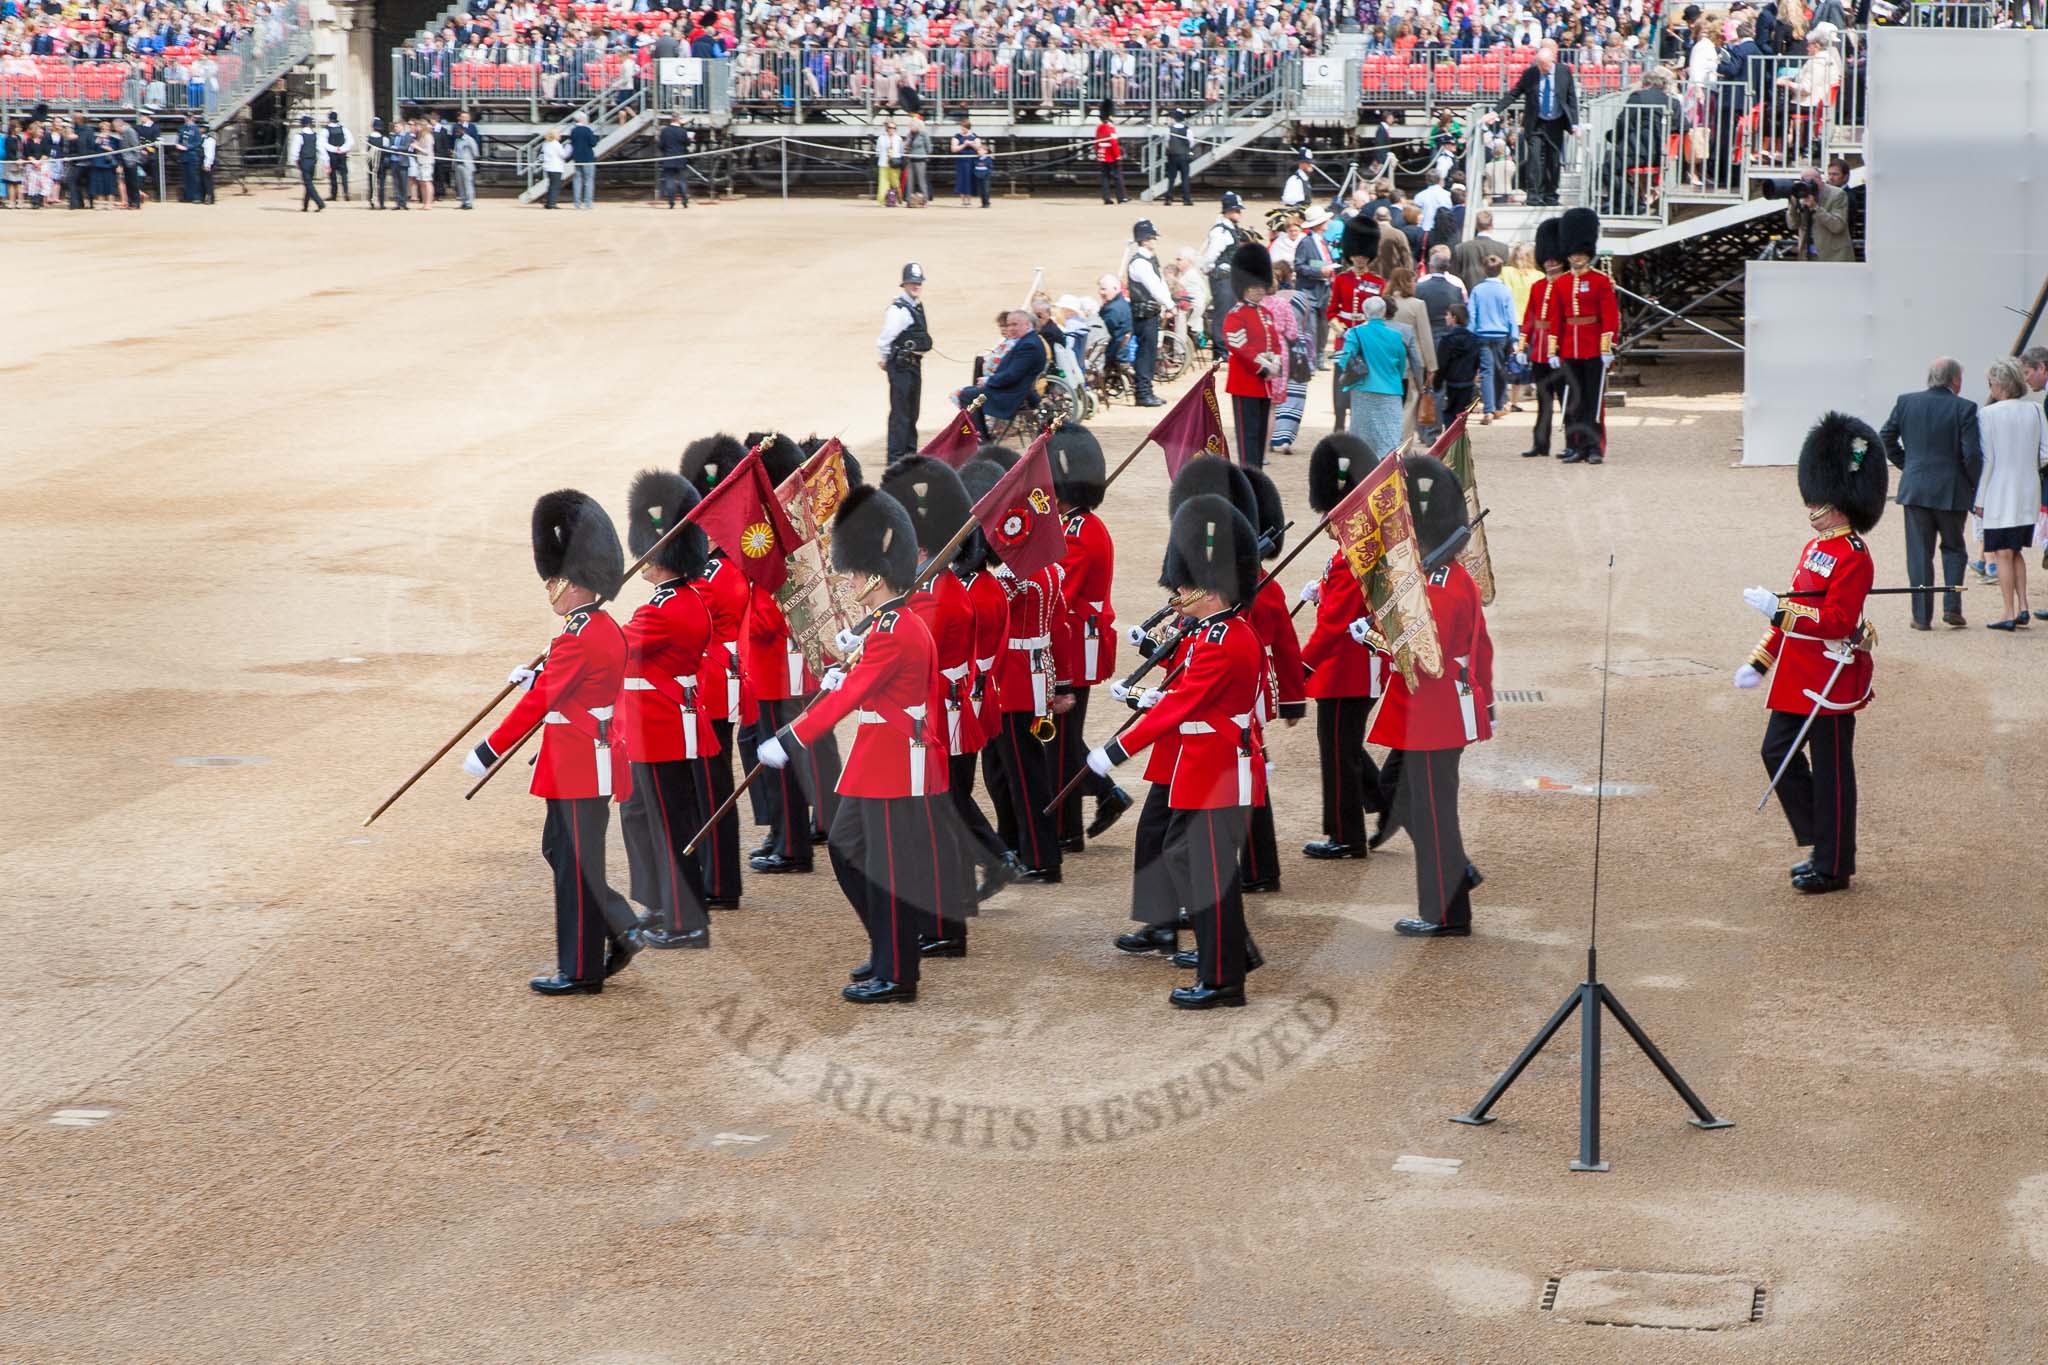 The Colonel's Review 2013: The Keepers of the Ground are marching back onto Horse Guards Parade, to mark the position of their regiments that will arrive shortly..
Horse Guards Parade, Westminster,
London SW1,

United Kingdom,
on 08 June 2013 at 10:17, image #63